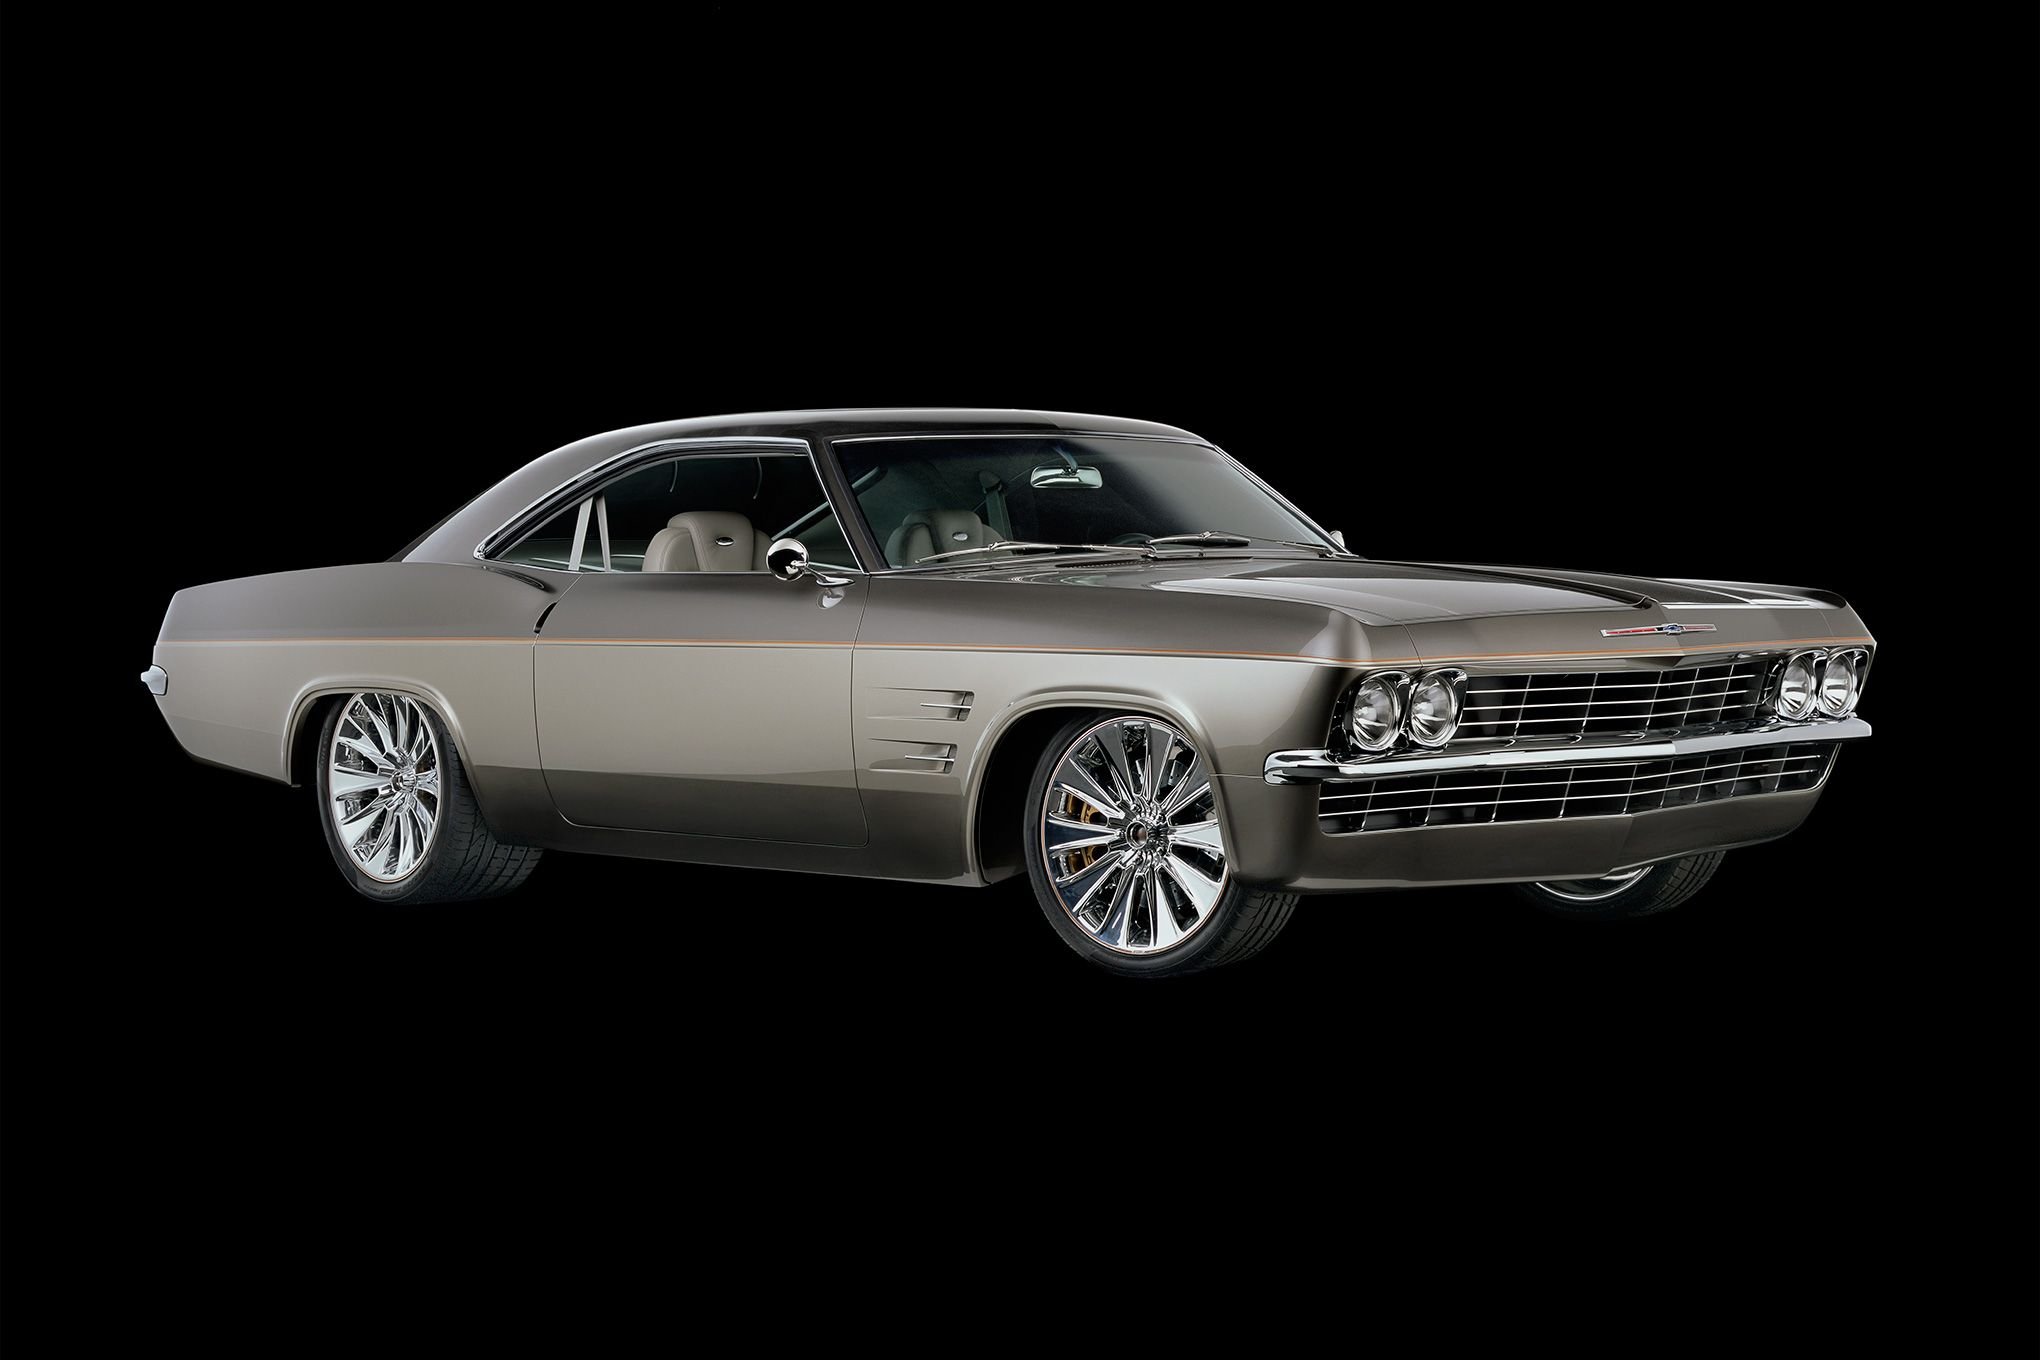 1965, Chevrolet, Chevy, Impala, Ss, Coupe, Hardtop, Super, Street, Pro, Touring, Cruiser, Low, Usa,  02 Wallpaper